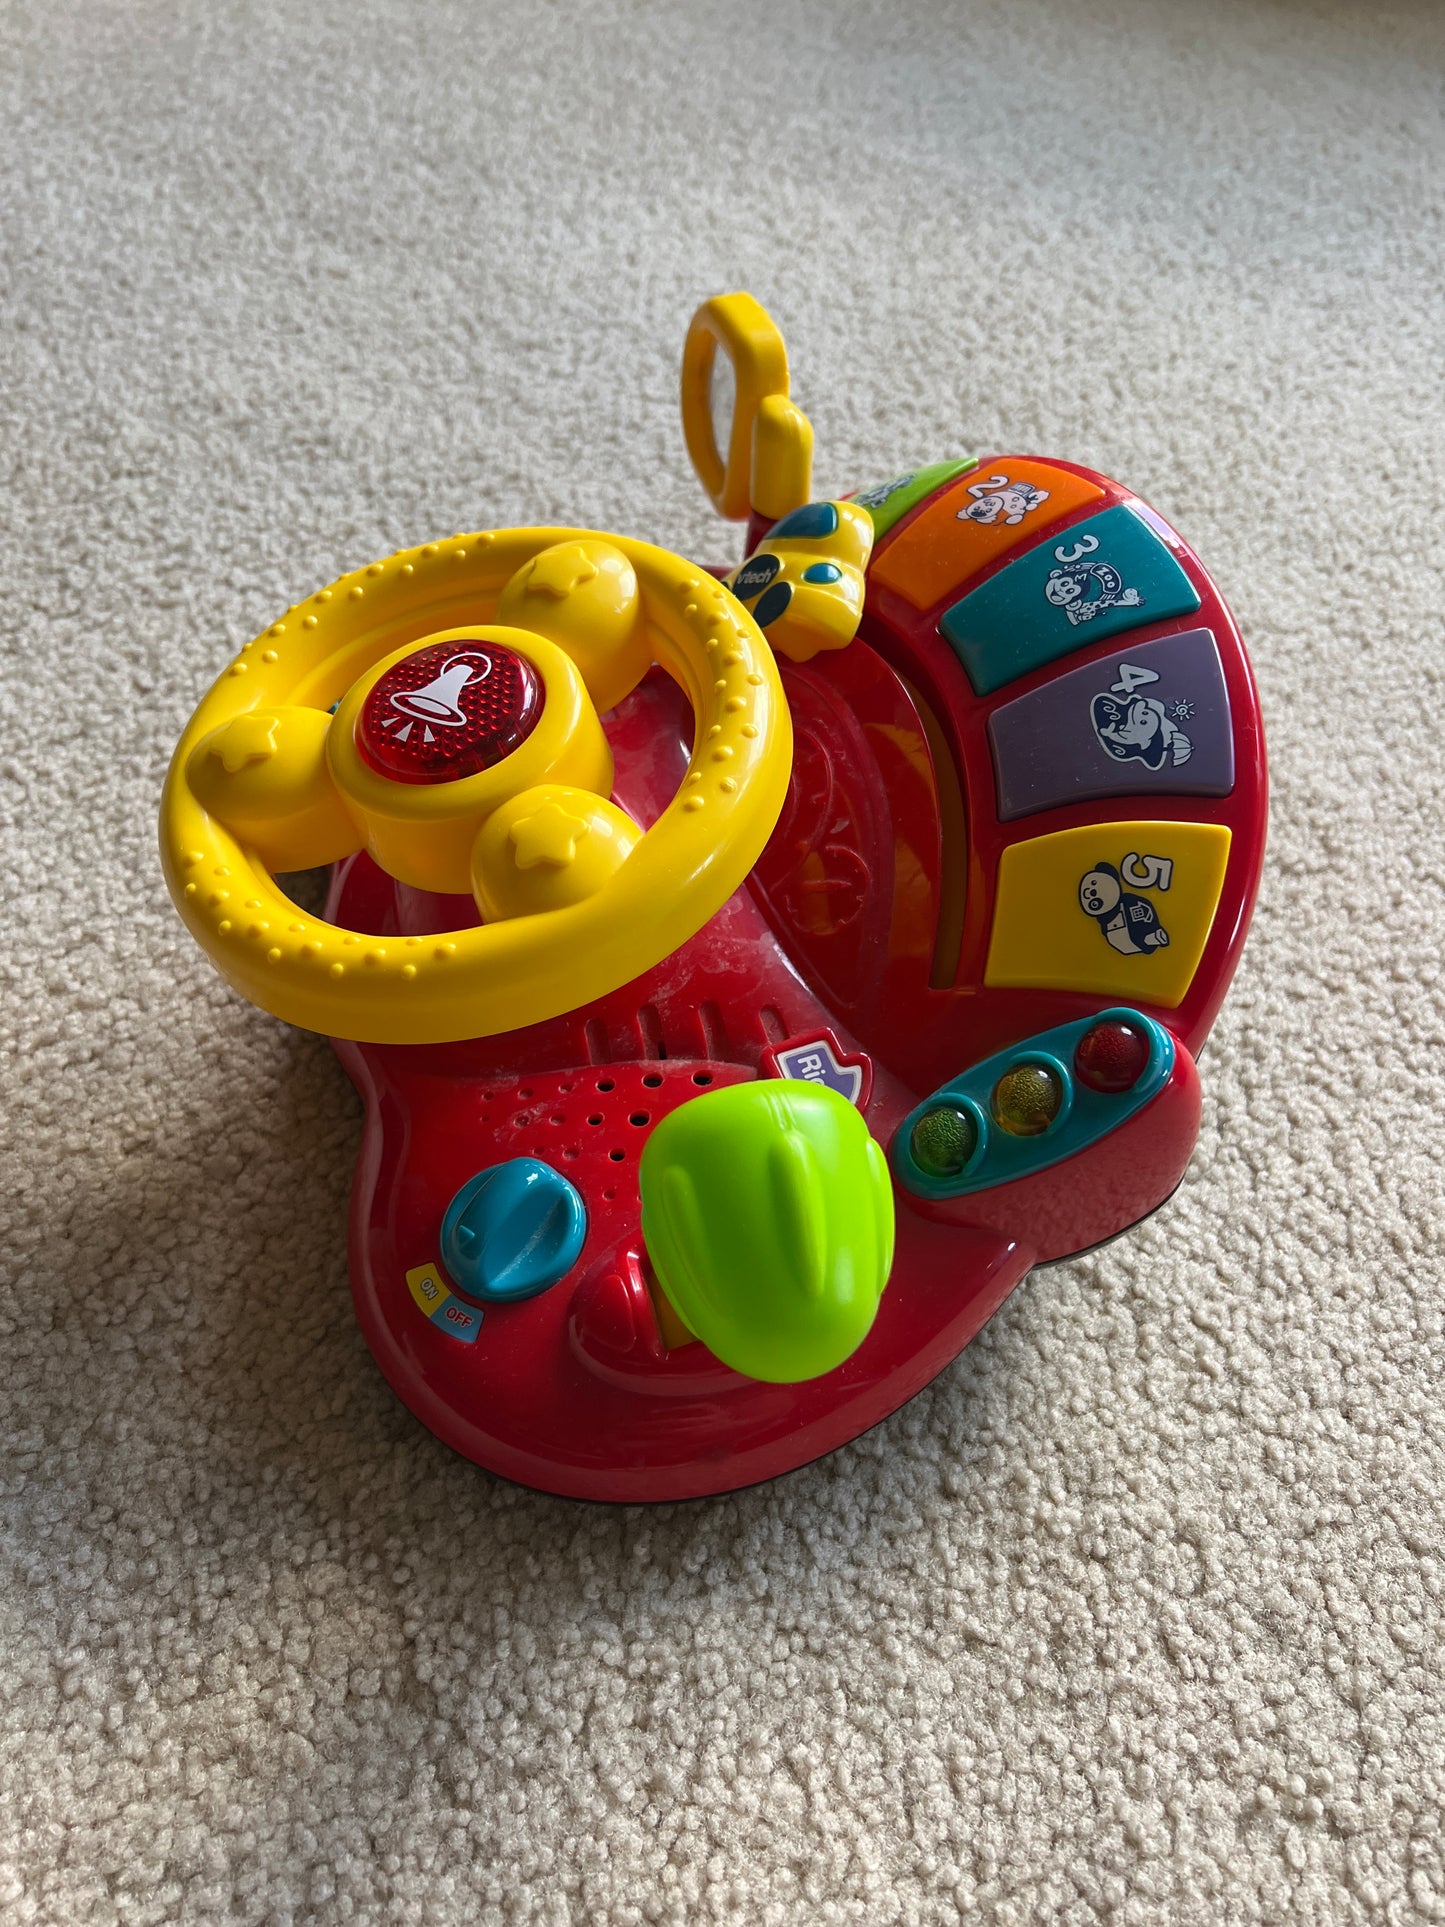 Toy Vtech Learn & Discover Driver